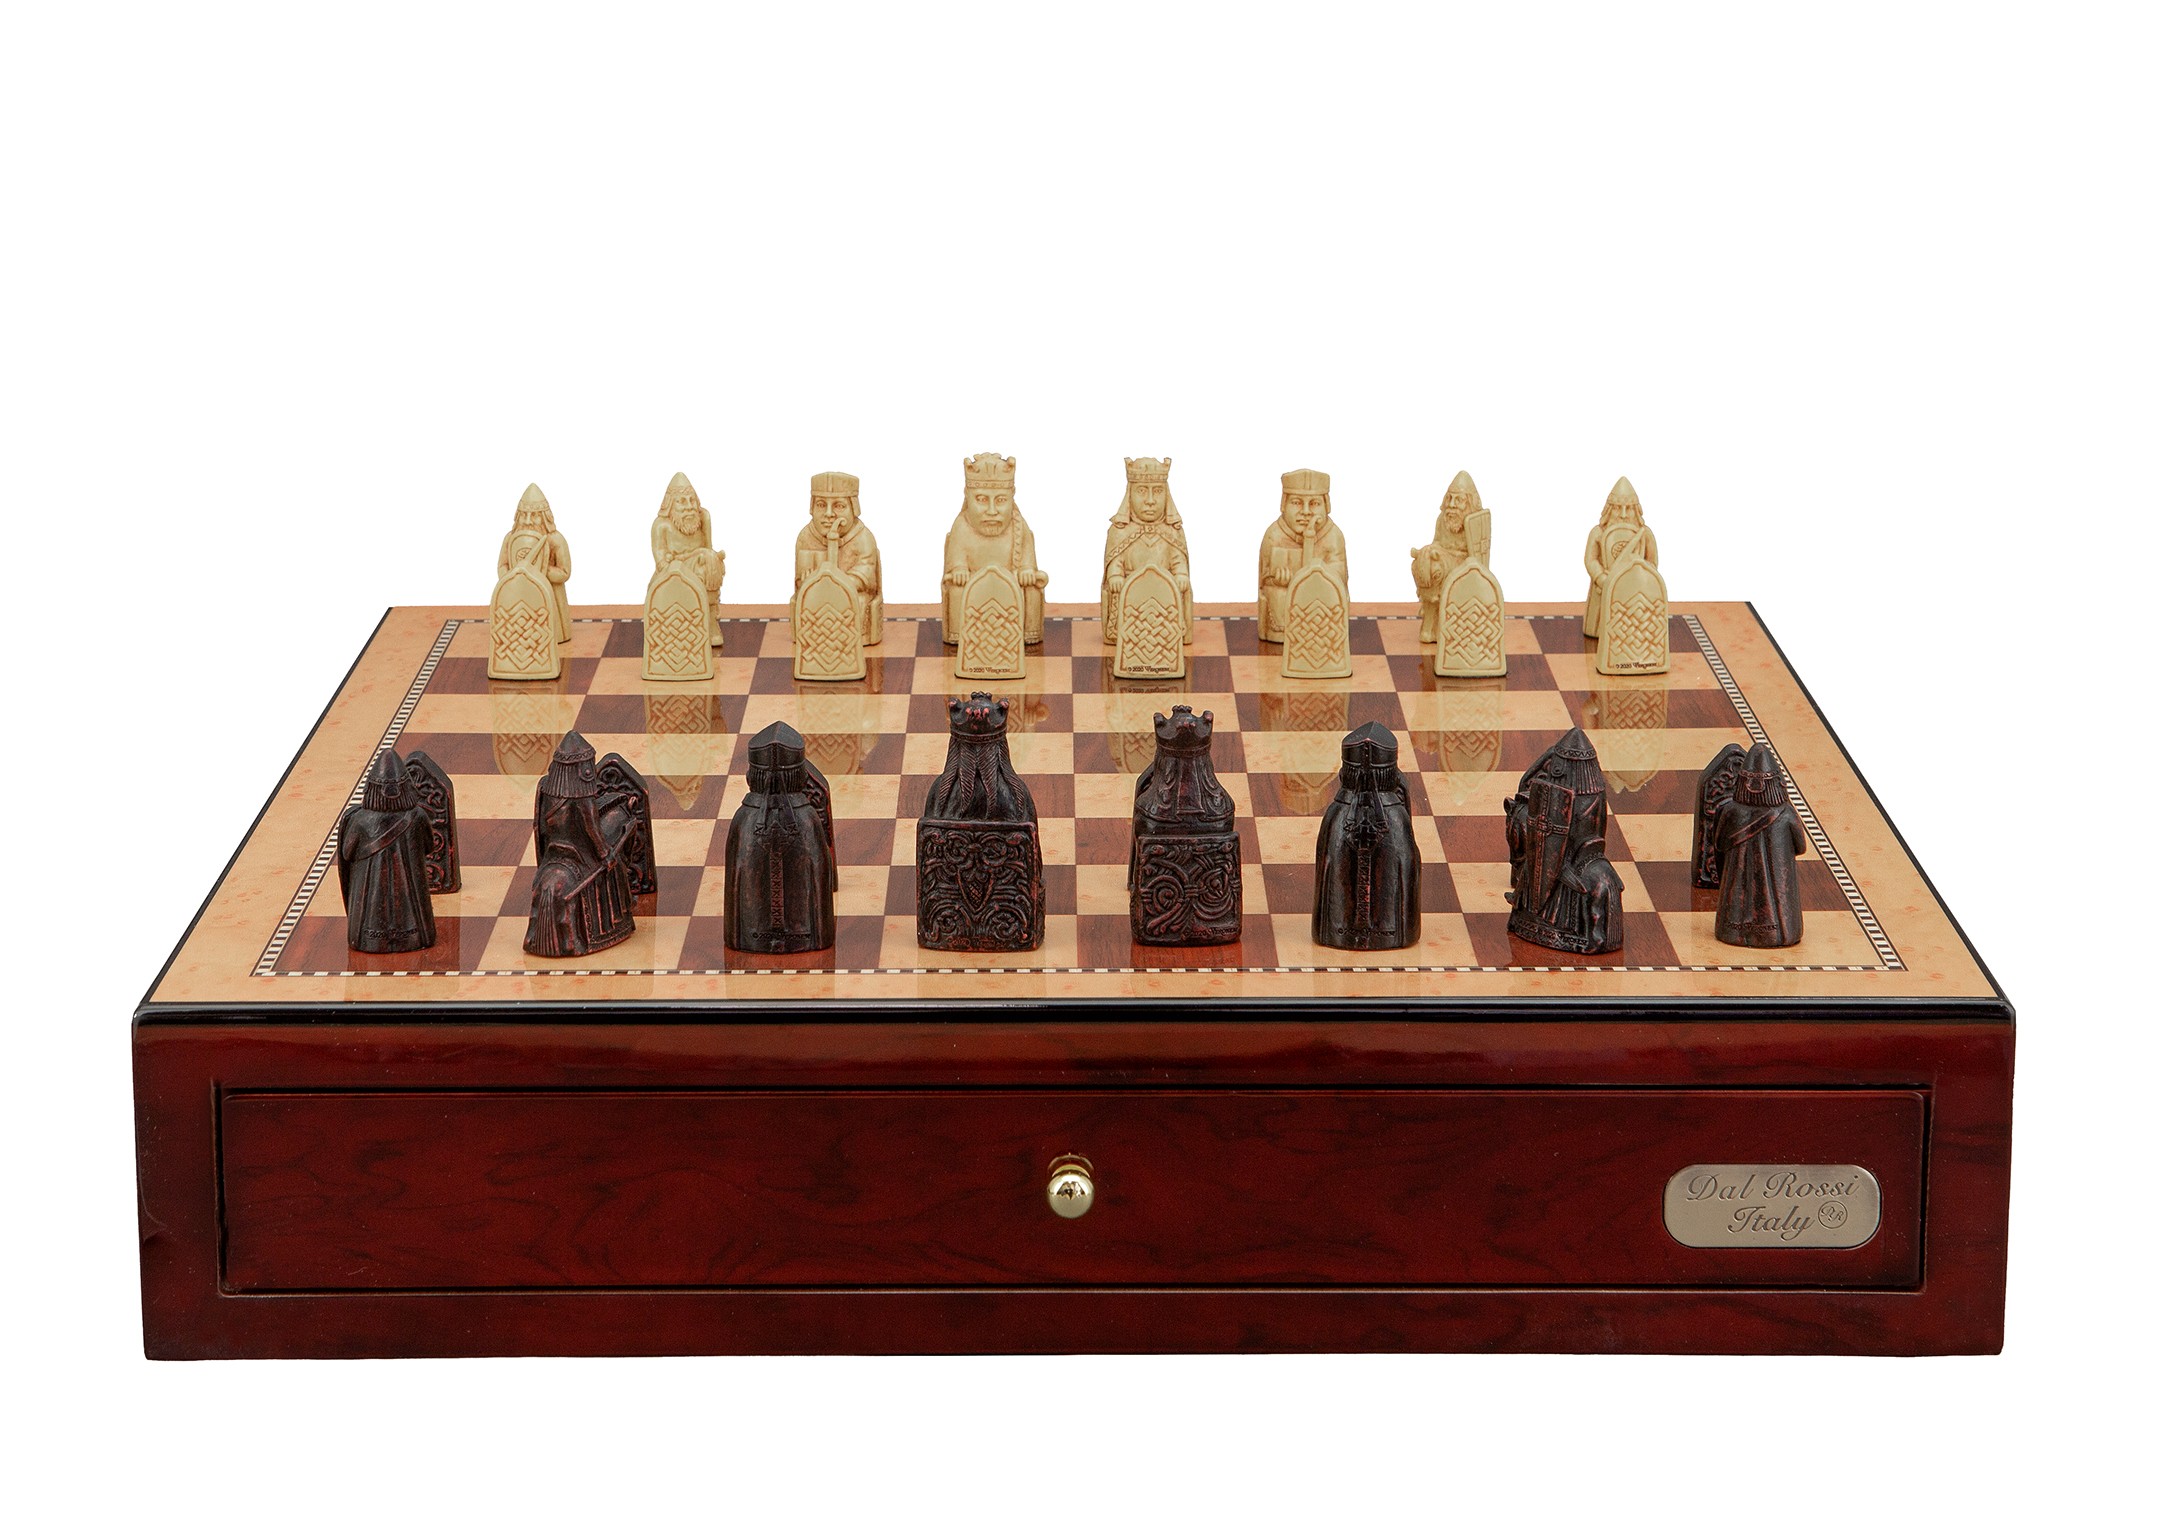 Dal Rossi Italy Isle of Lewis Chess Set on a Shiny Mahogany Chess Box with Drawers 18" 